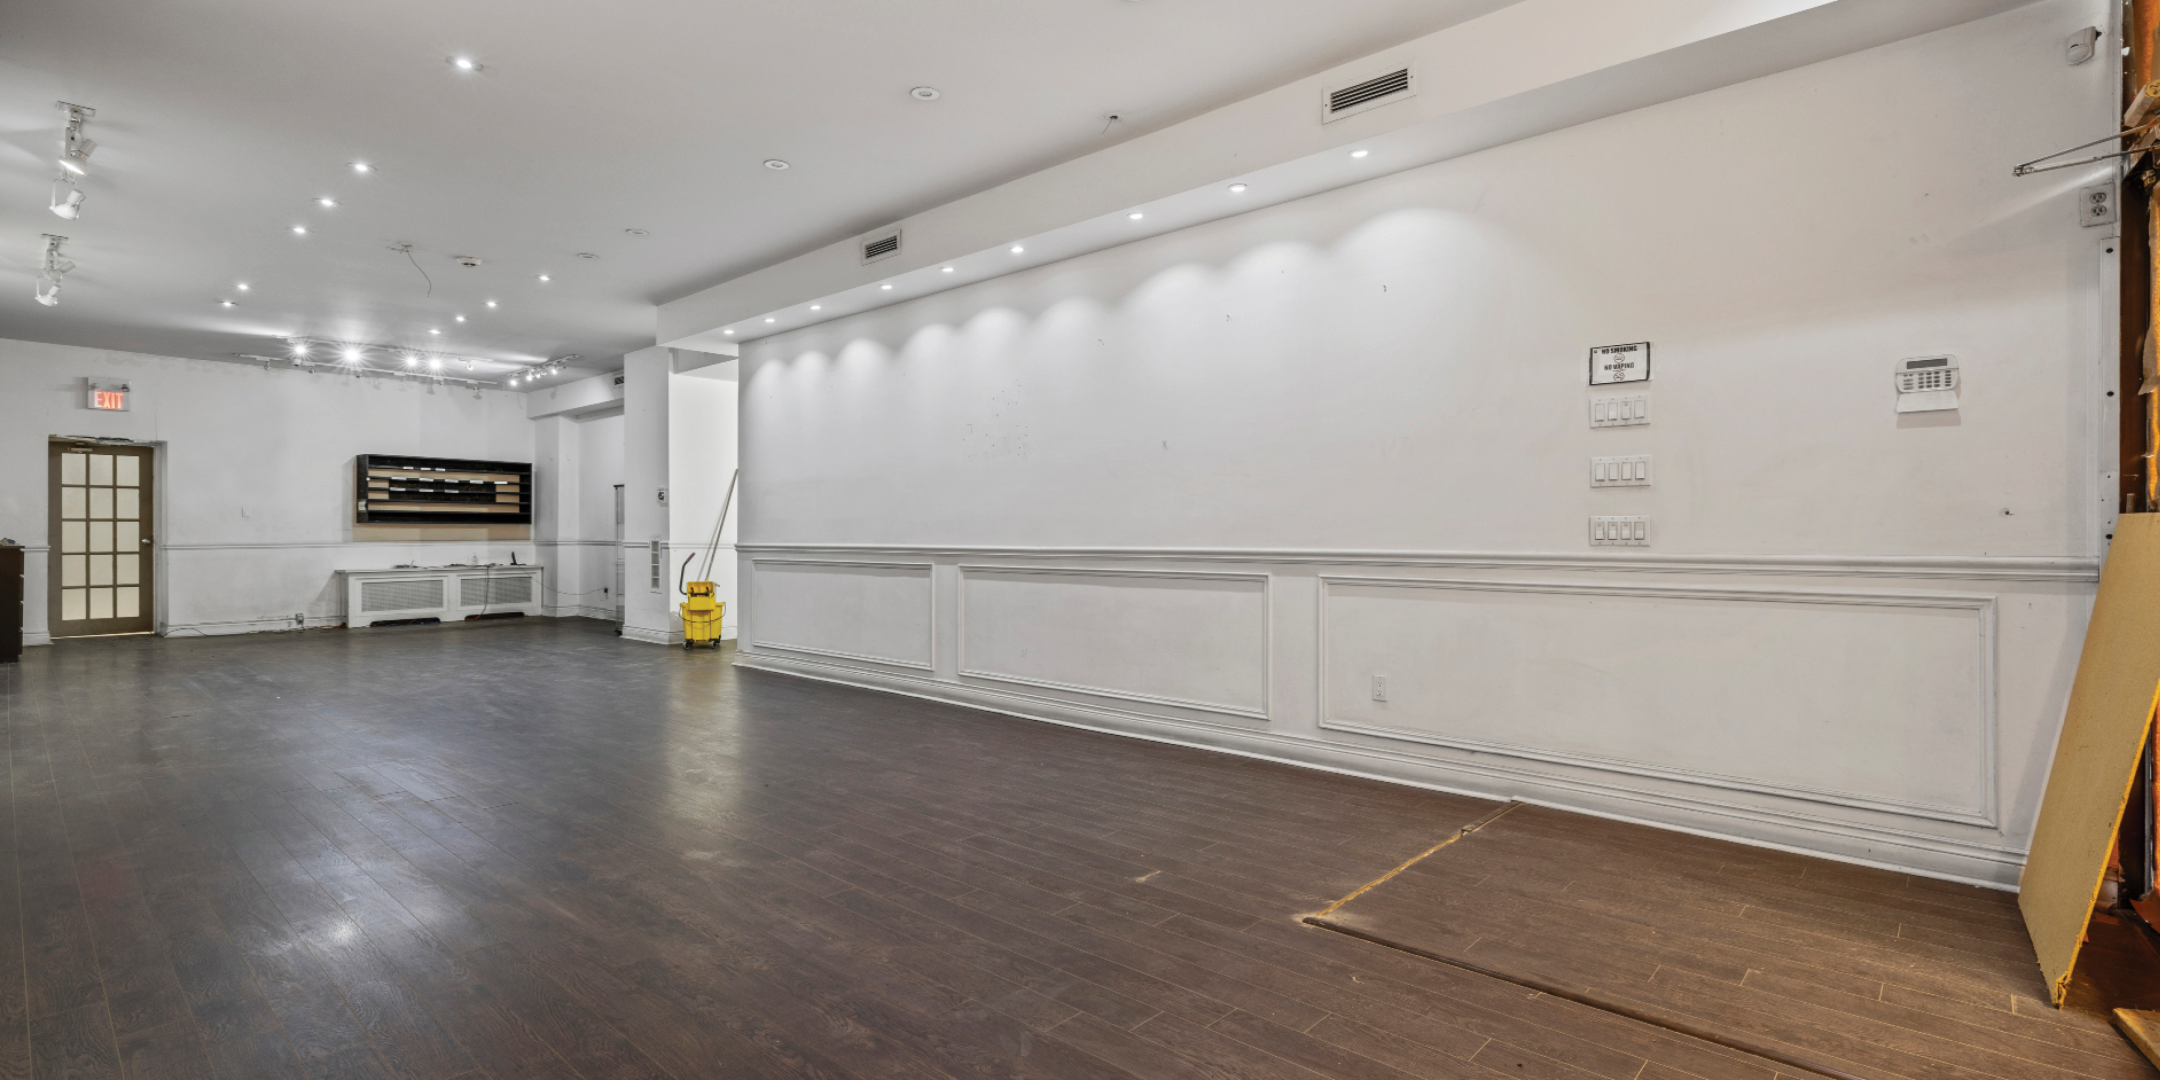 282 Eglinton Avenue West retail space interior showing the vacant space